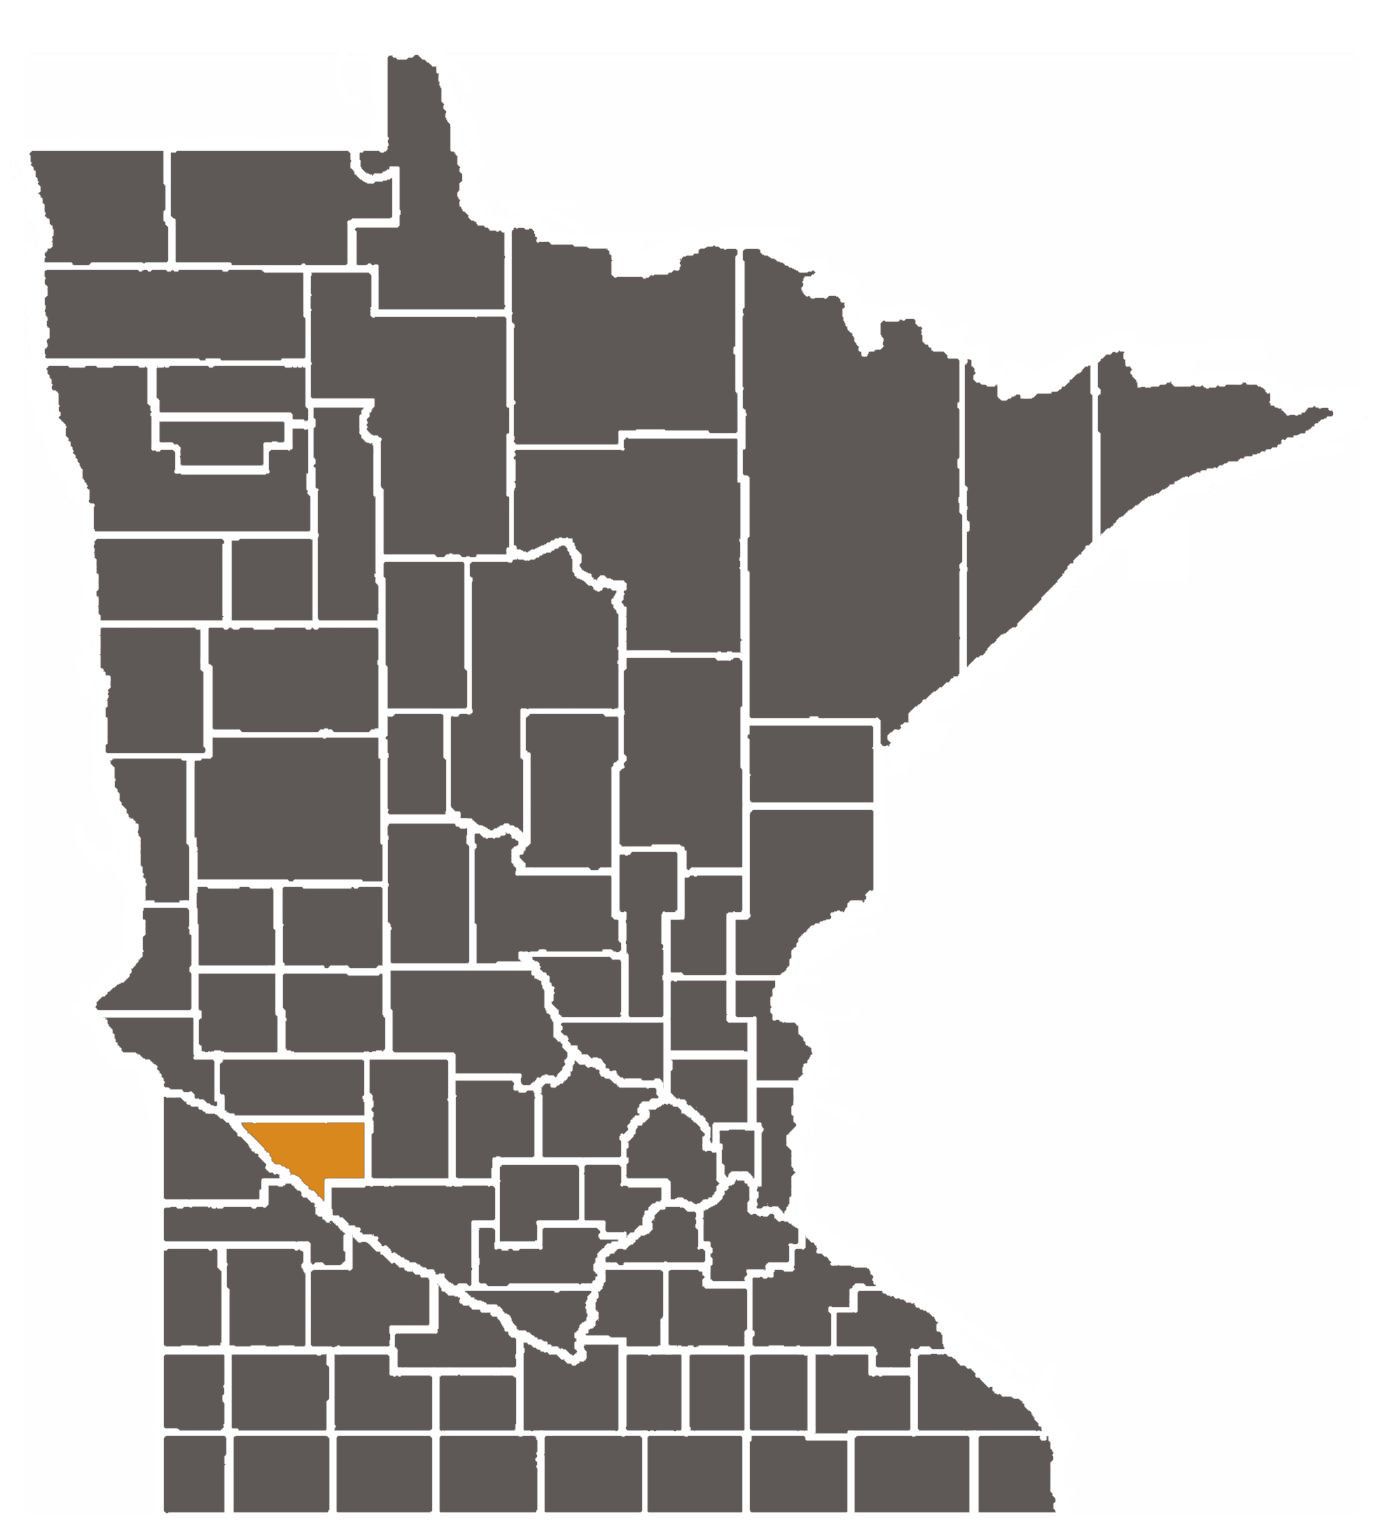 Minnesota map with Chippewa County highlighted.